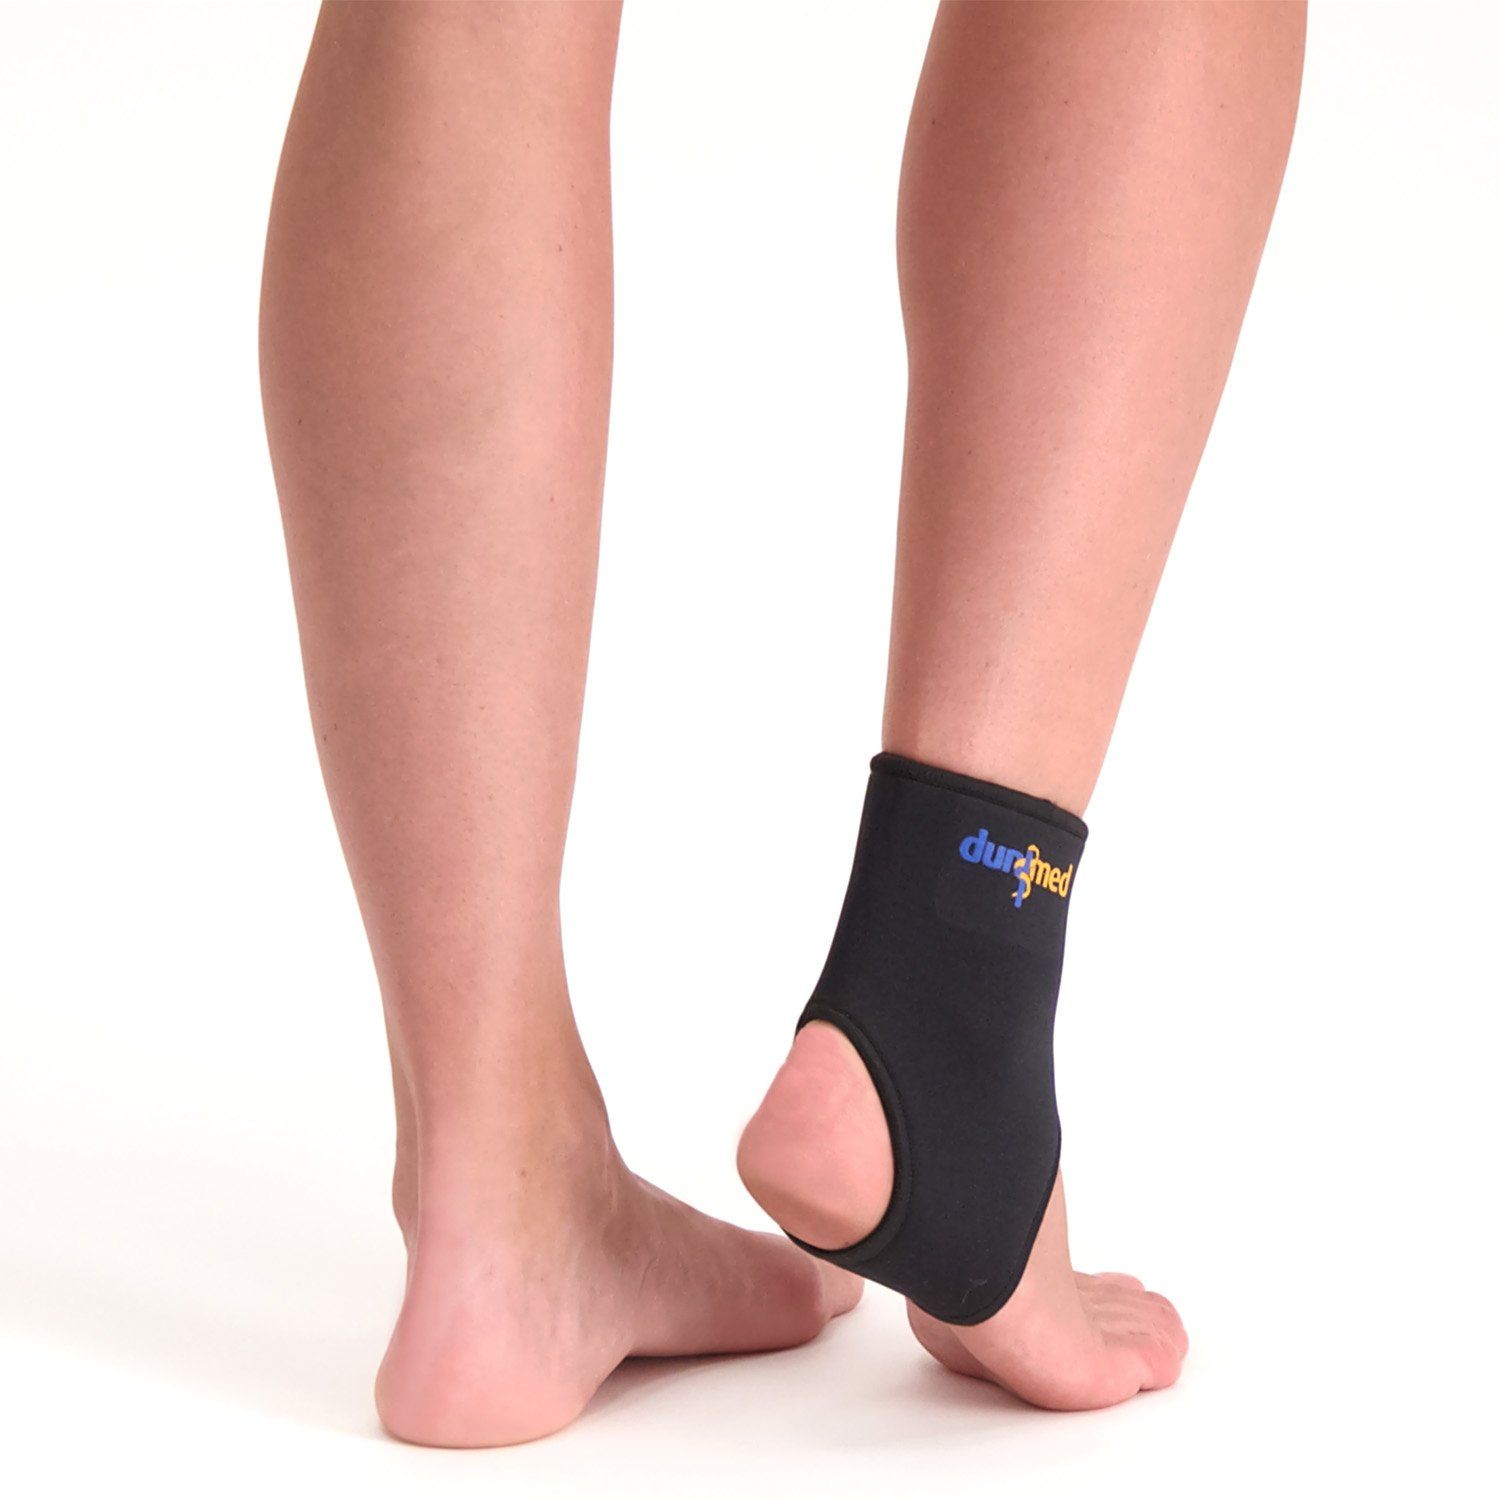 Dunimed ankle support product from behind